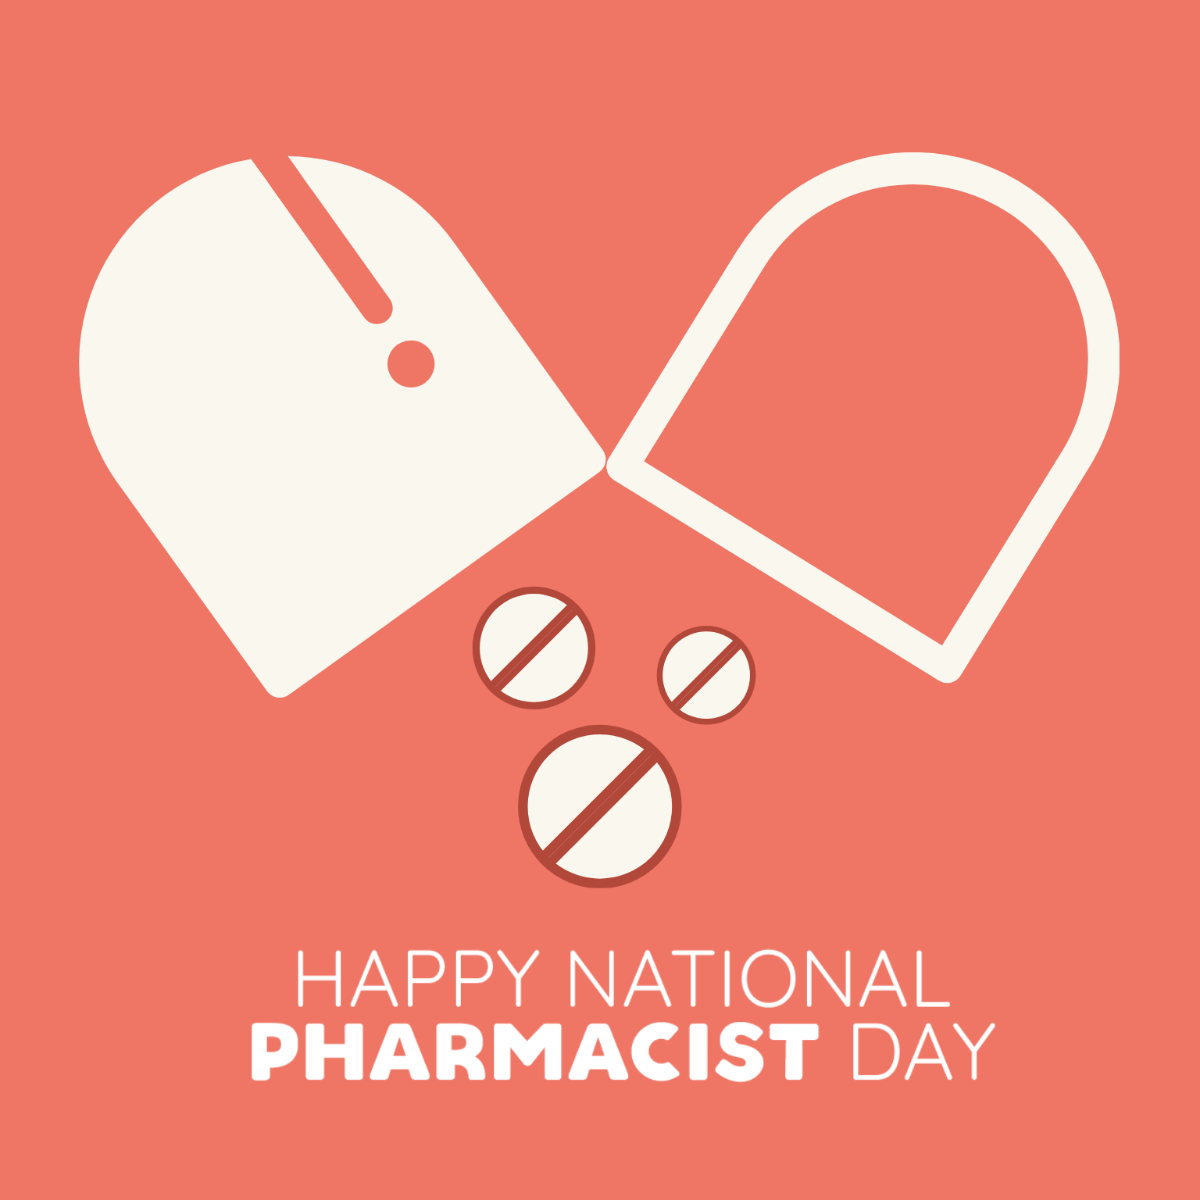 Free Happy National Pharmacist Day Vector Template